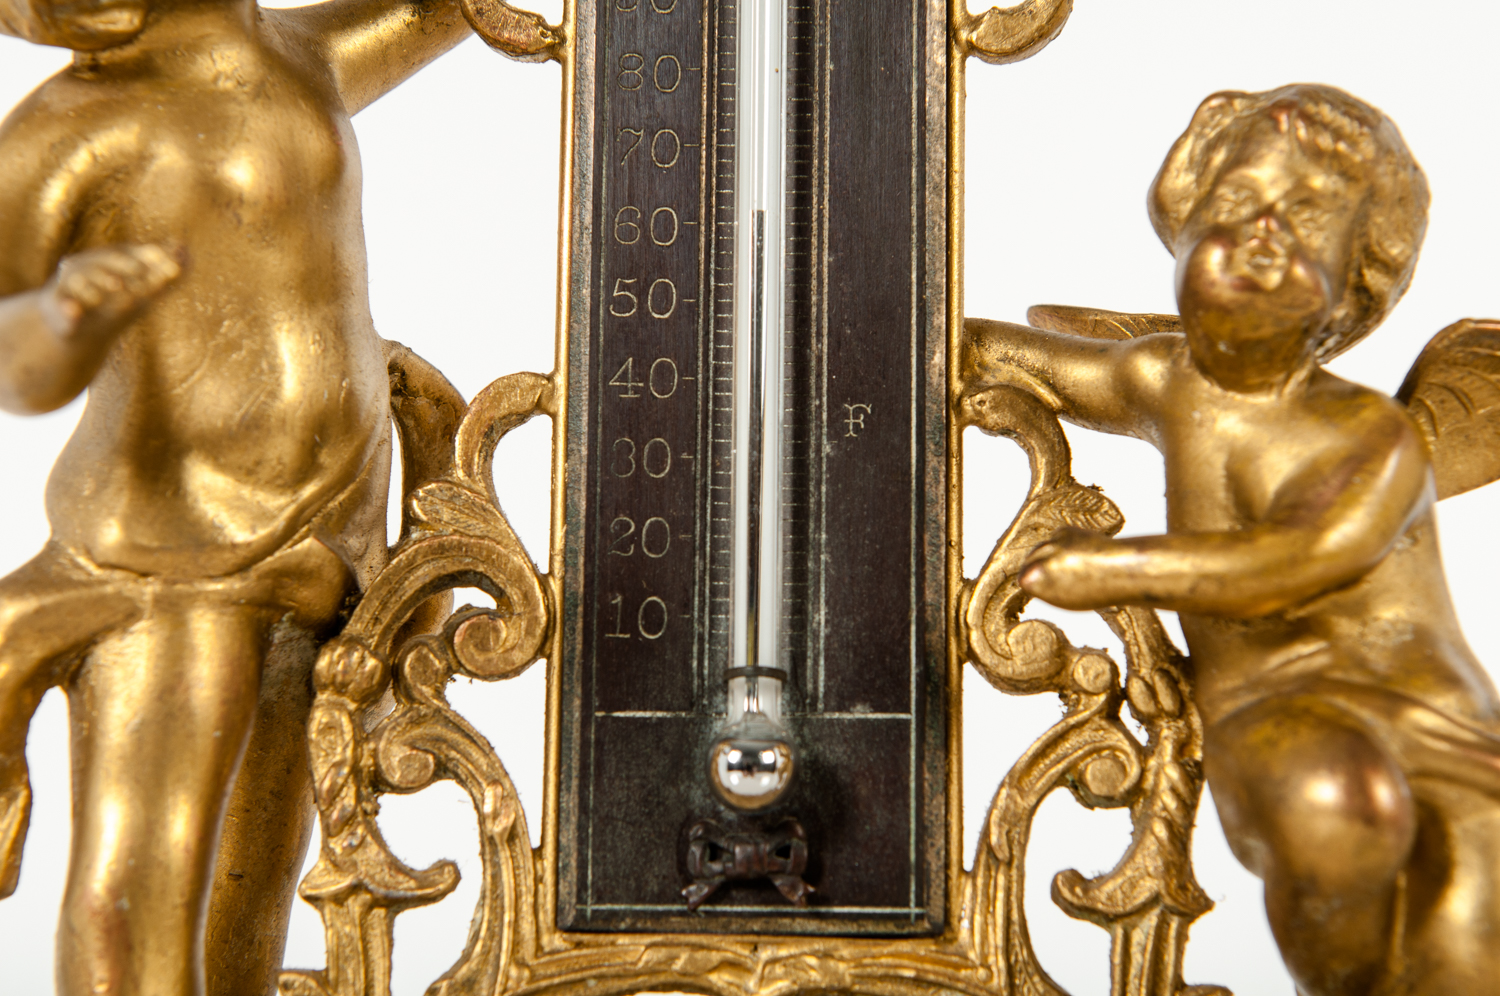 Vintage French Wine Thermometer with brass/metal top/handle / Fleur de lis